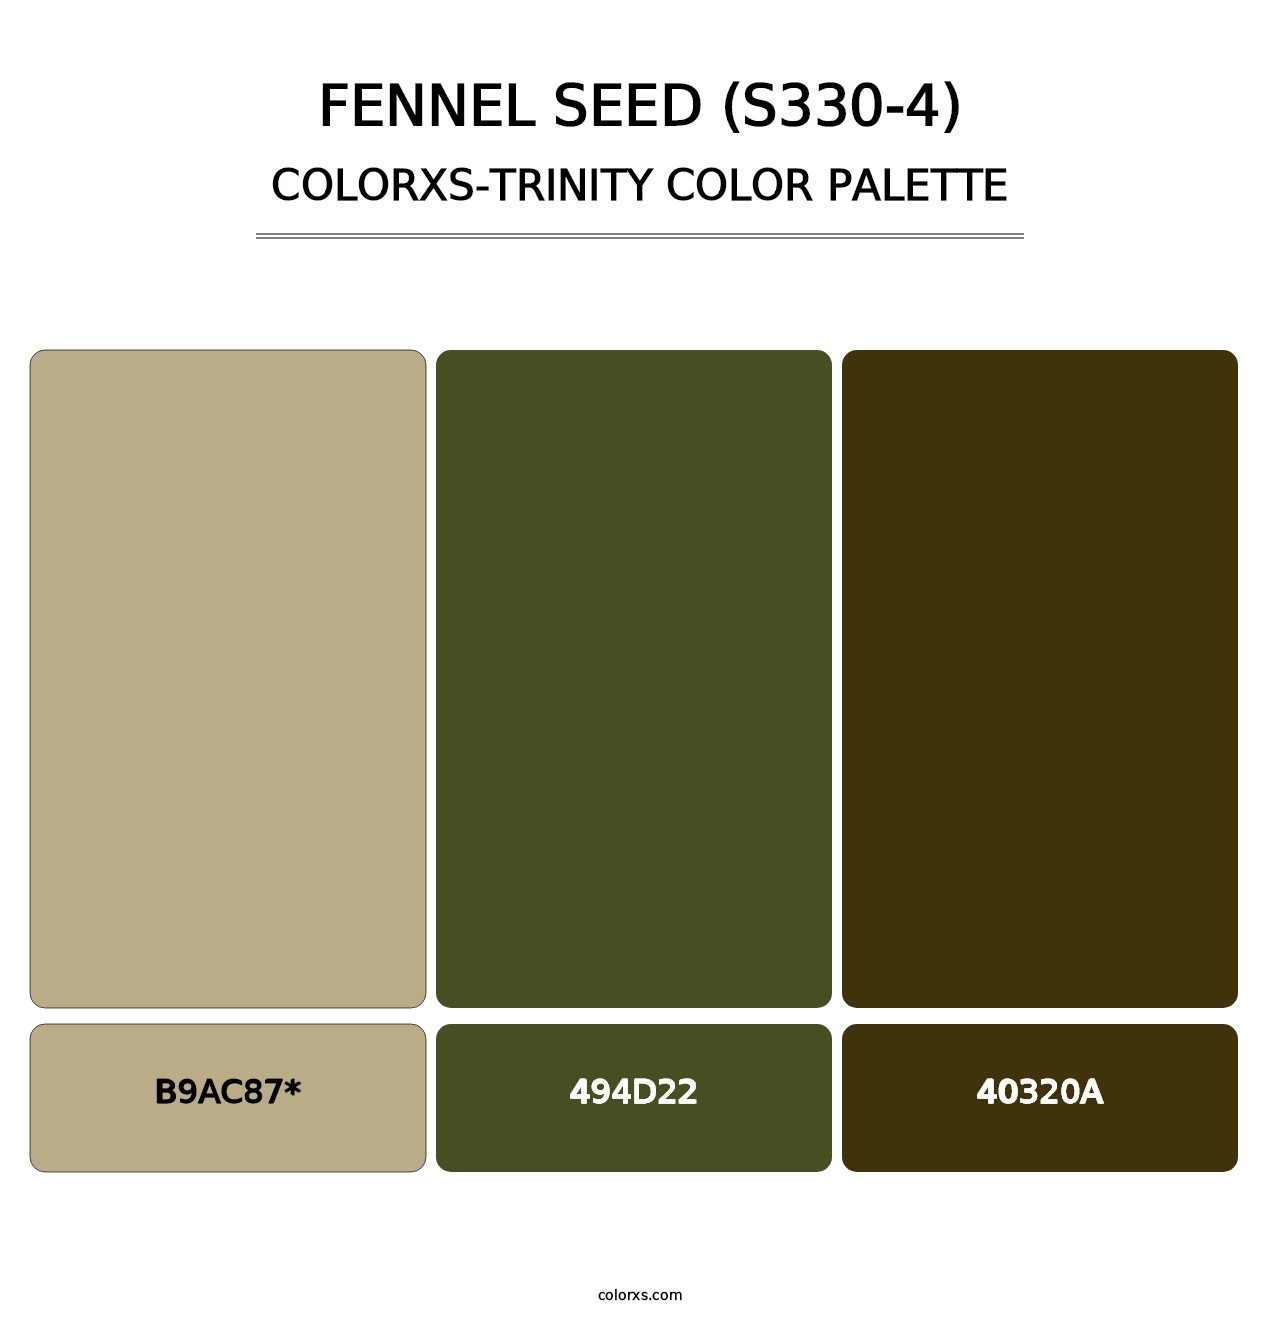 Fennel Seed (S330-4) - Colorxs Trinity Palette